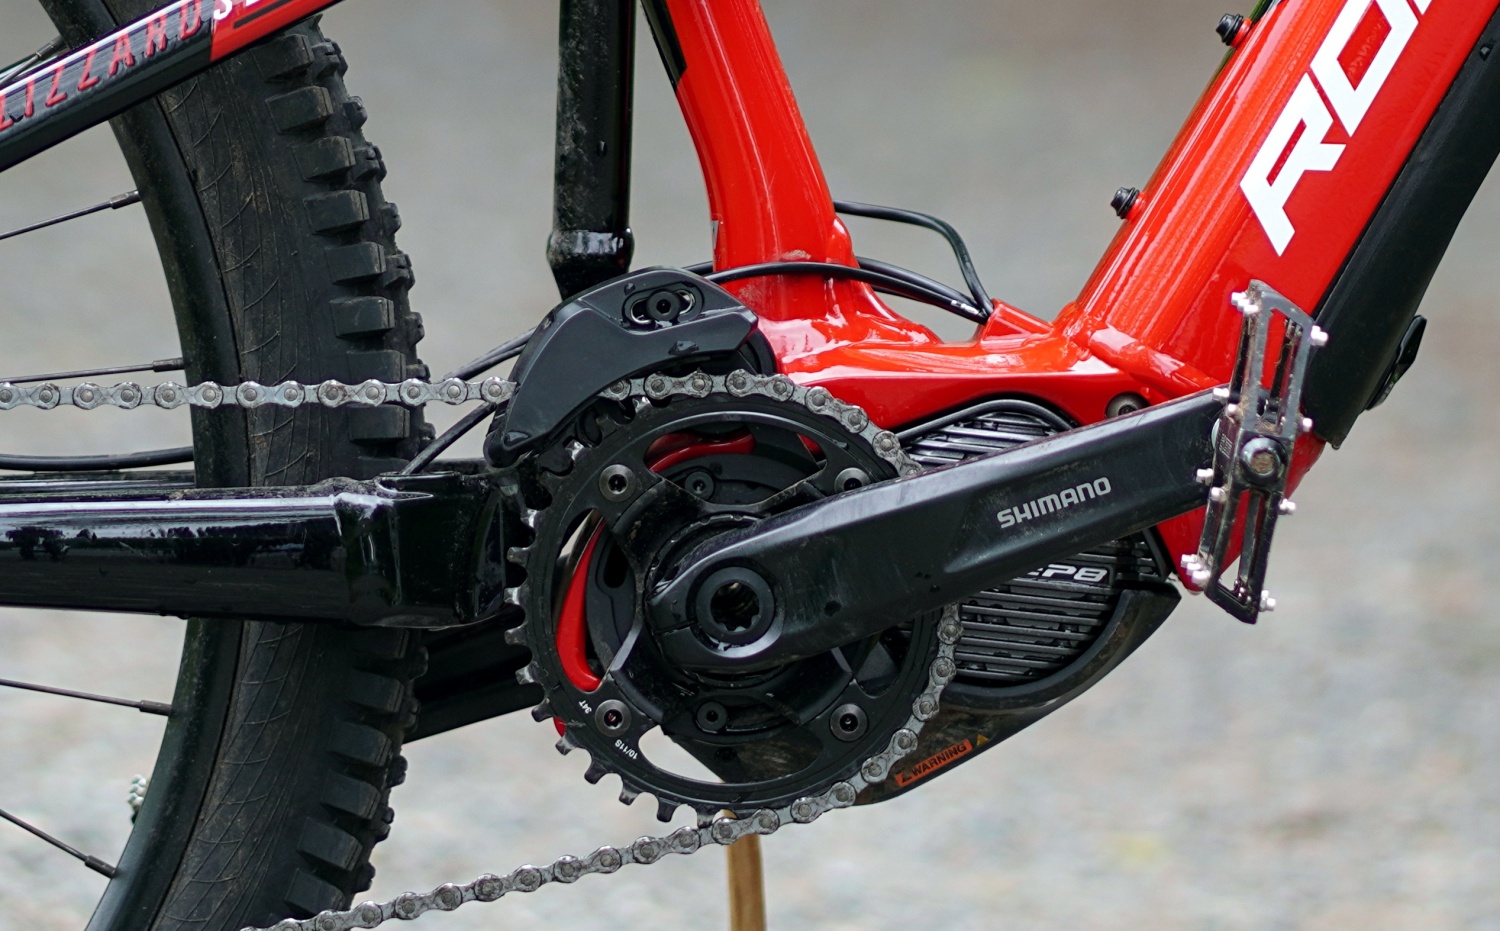 Shimano EP8 (EP800) on a 2022 Rock Machine Blizzard INT